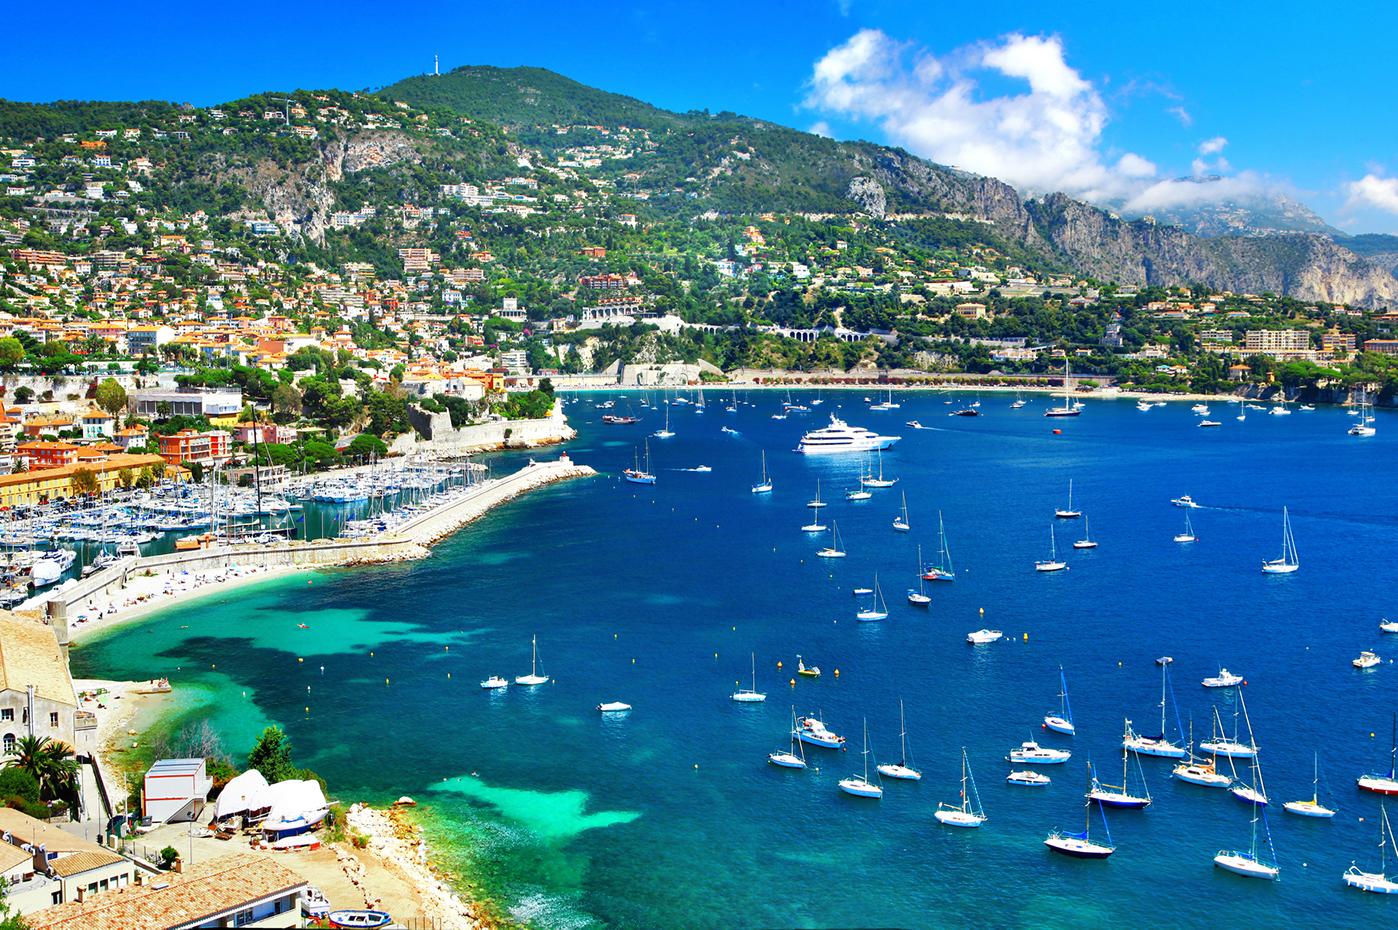 Stunning views of Nice’s coastline in the French Riviera